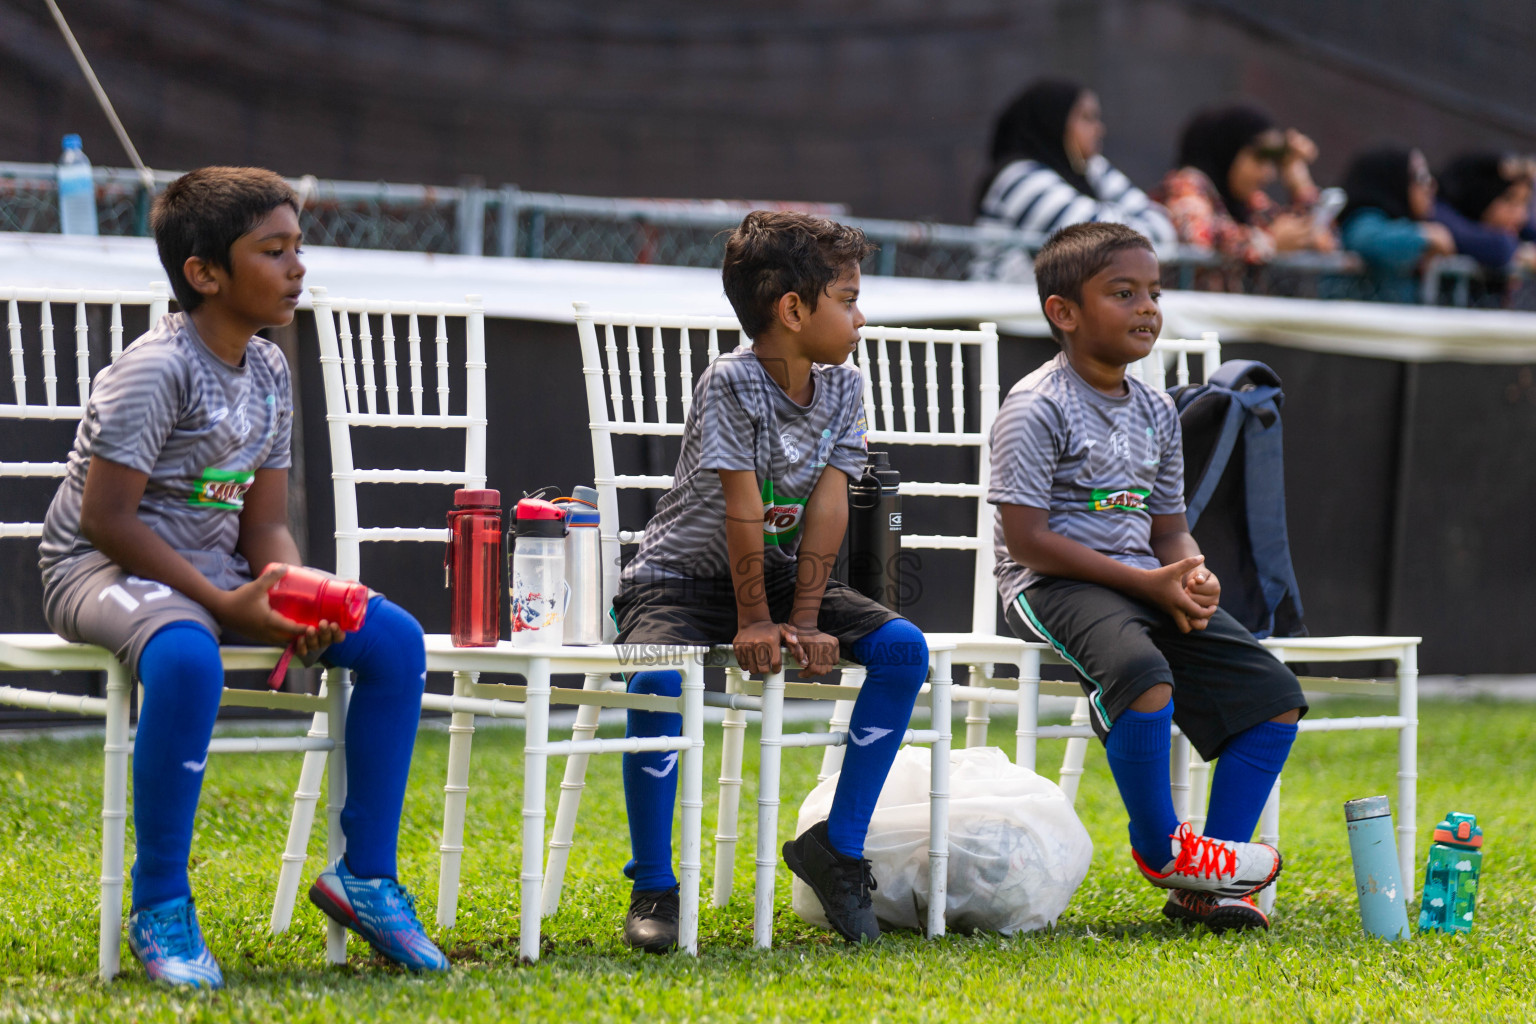 Day 1 of MILO Kids Football Fiesta was held at National Stadium in Male', Maldives on Friday, 23rd February 2024.